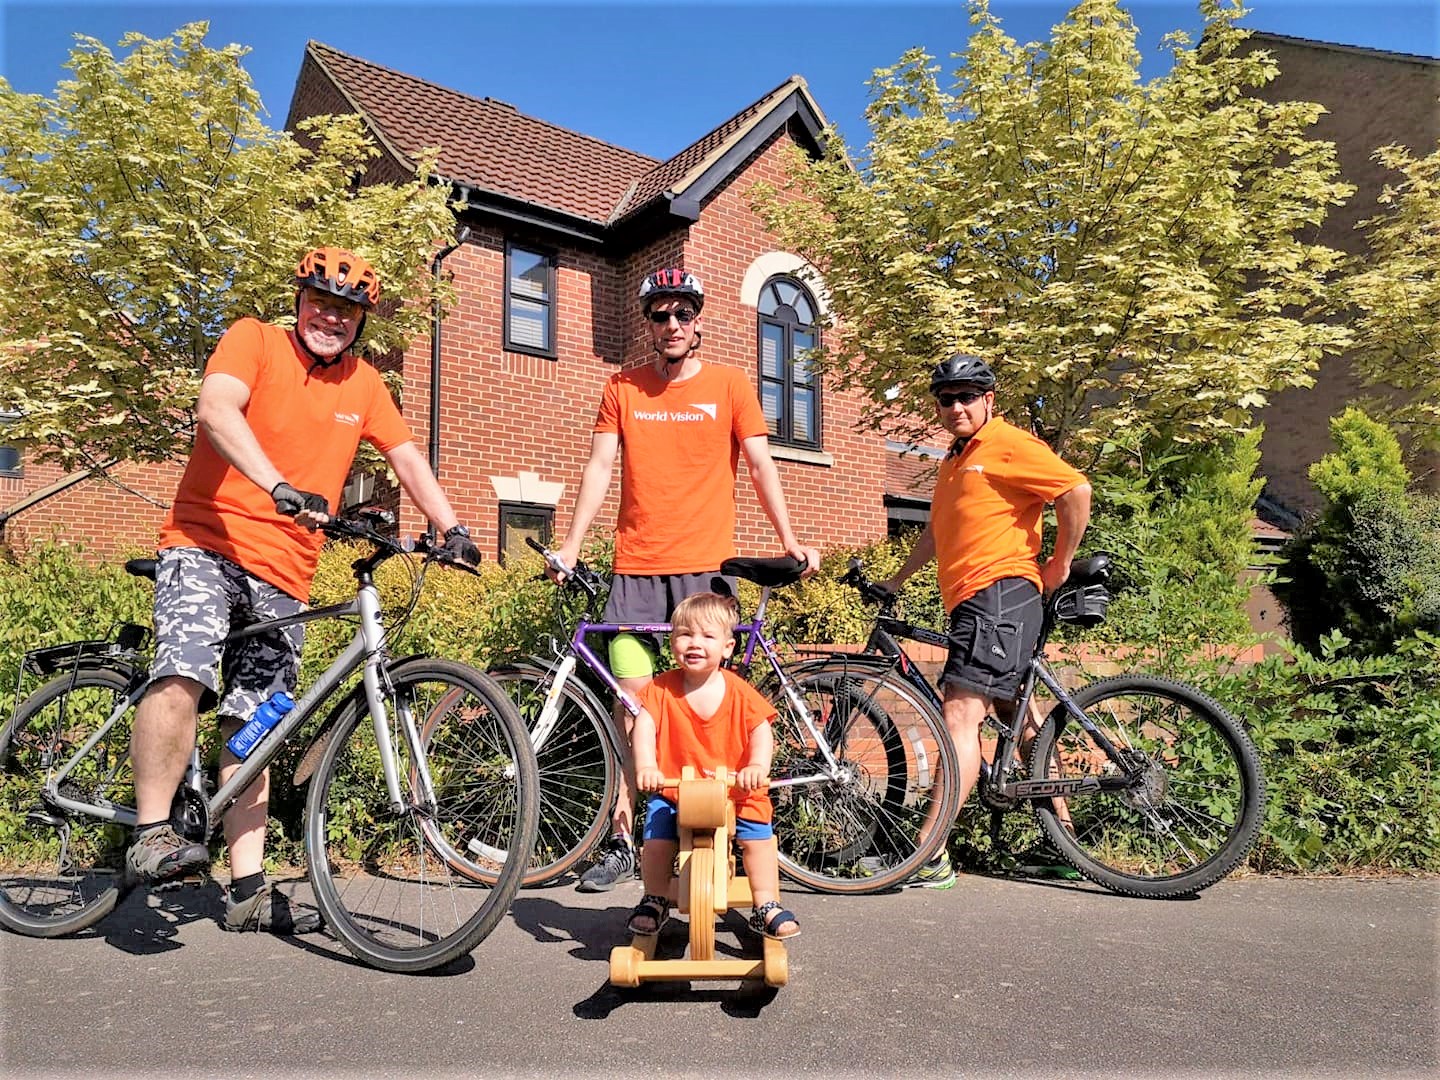 Family of four pose with bicycles in orange t-shirts to raise funds to protect children from coronavirus